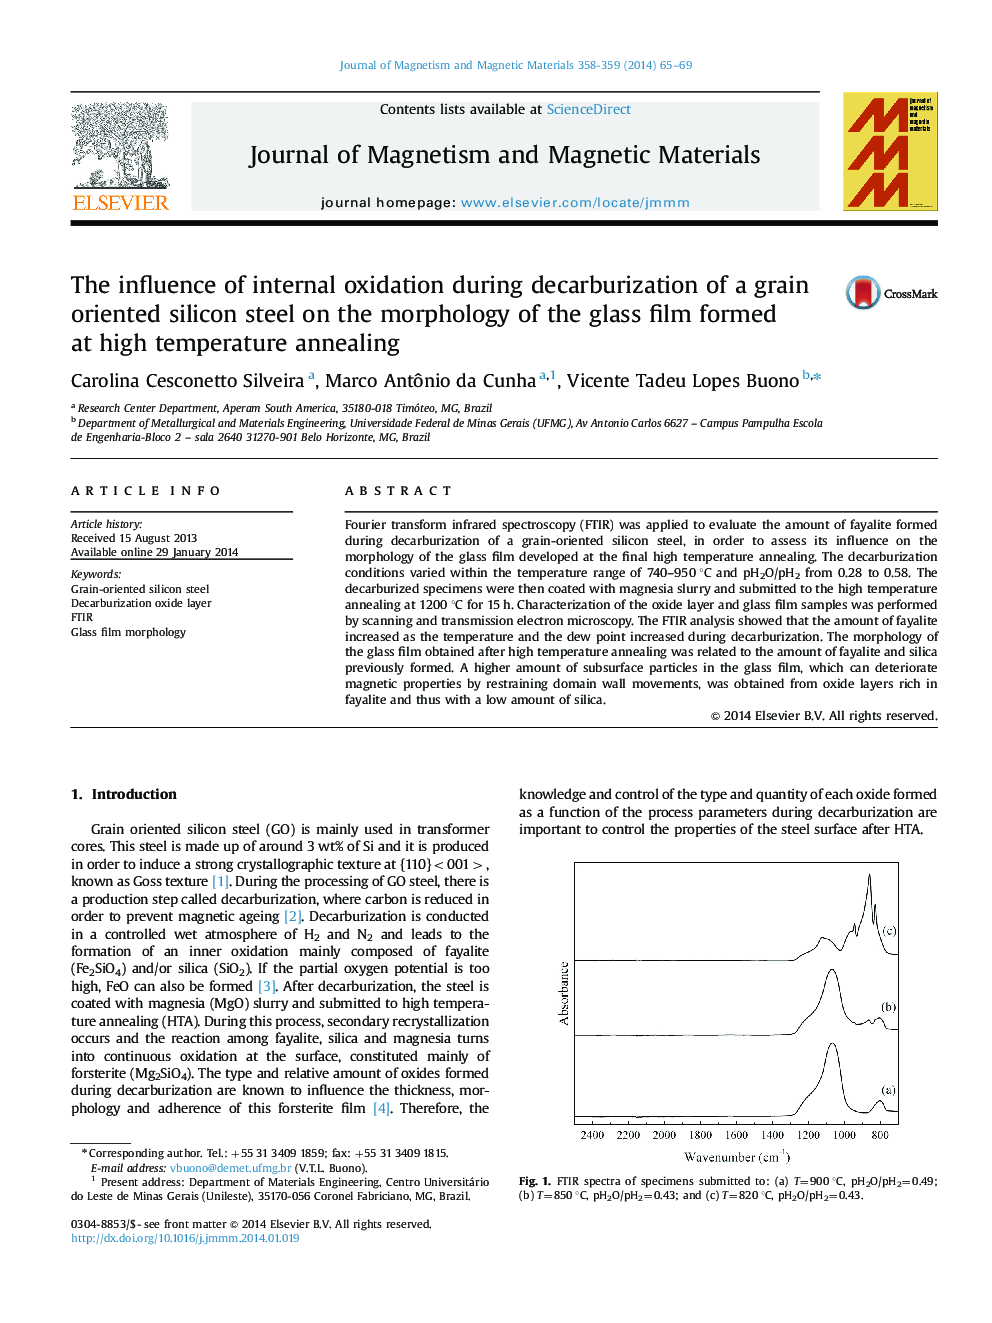 The influence of internal oxidation during decarburization of a grain oriented silicon steel on the morphology of the glass film formed at high temperature annealing